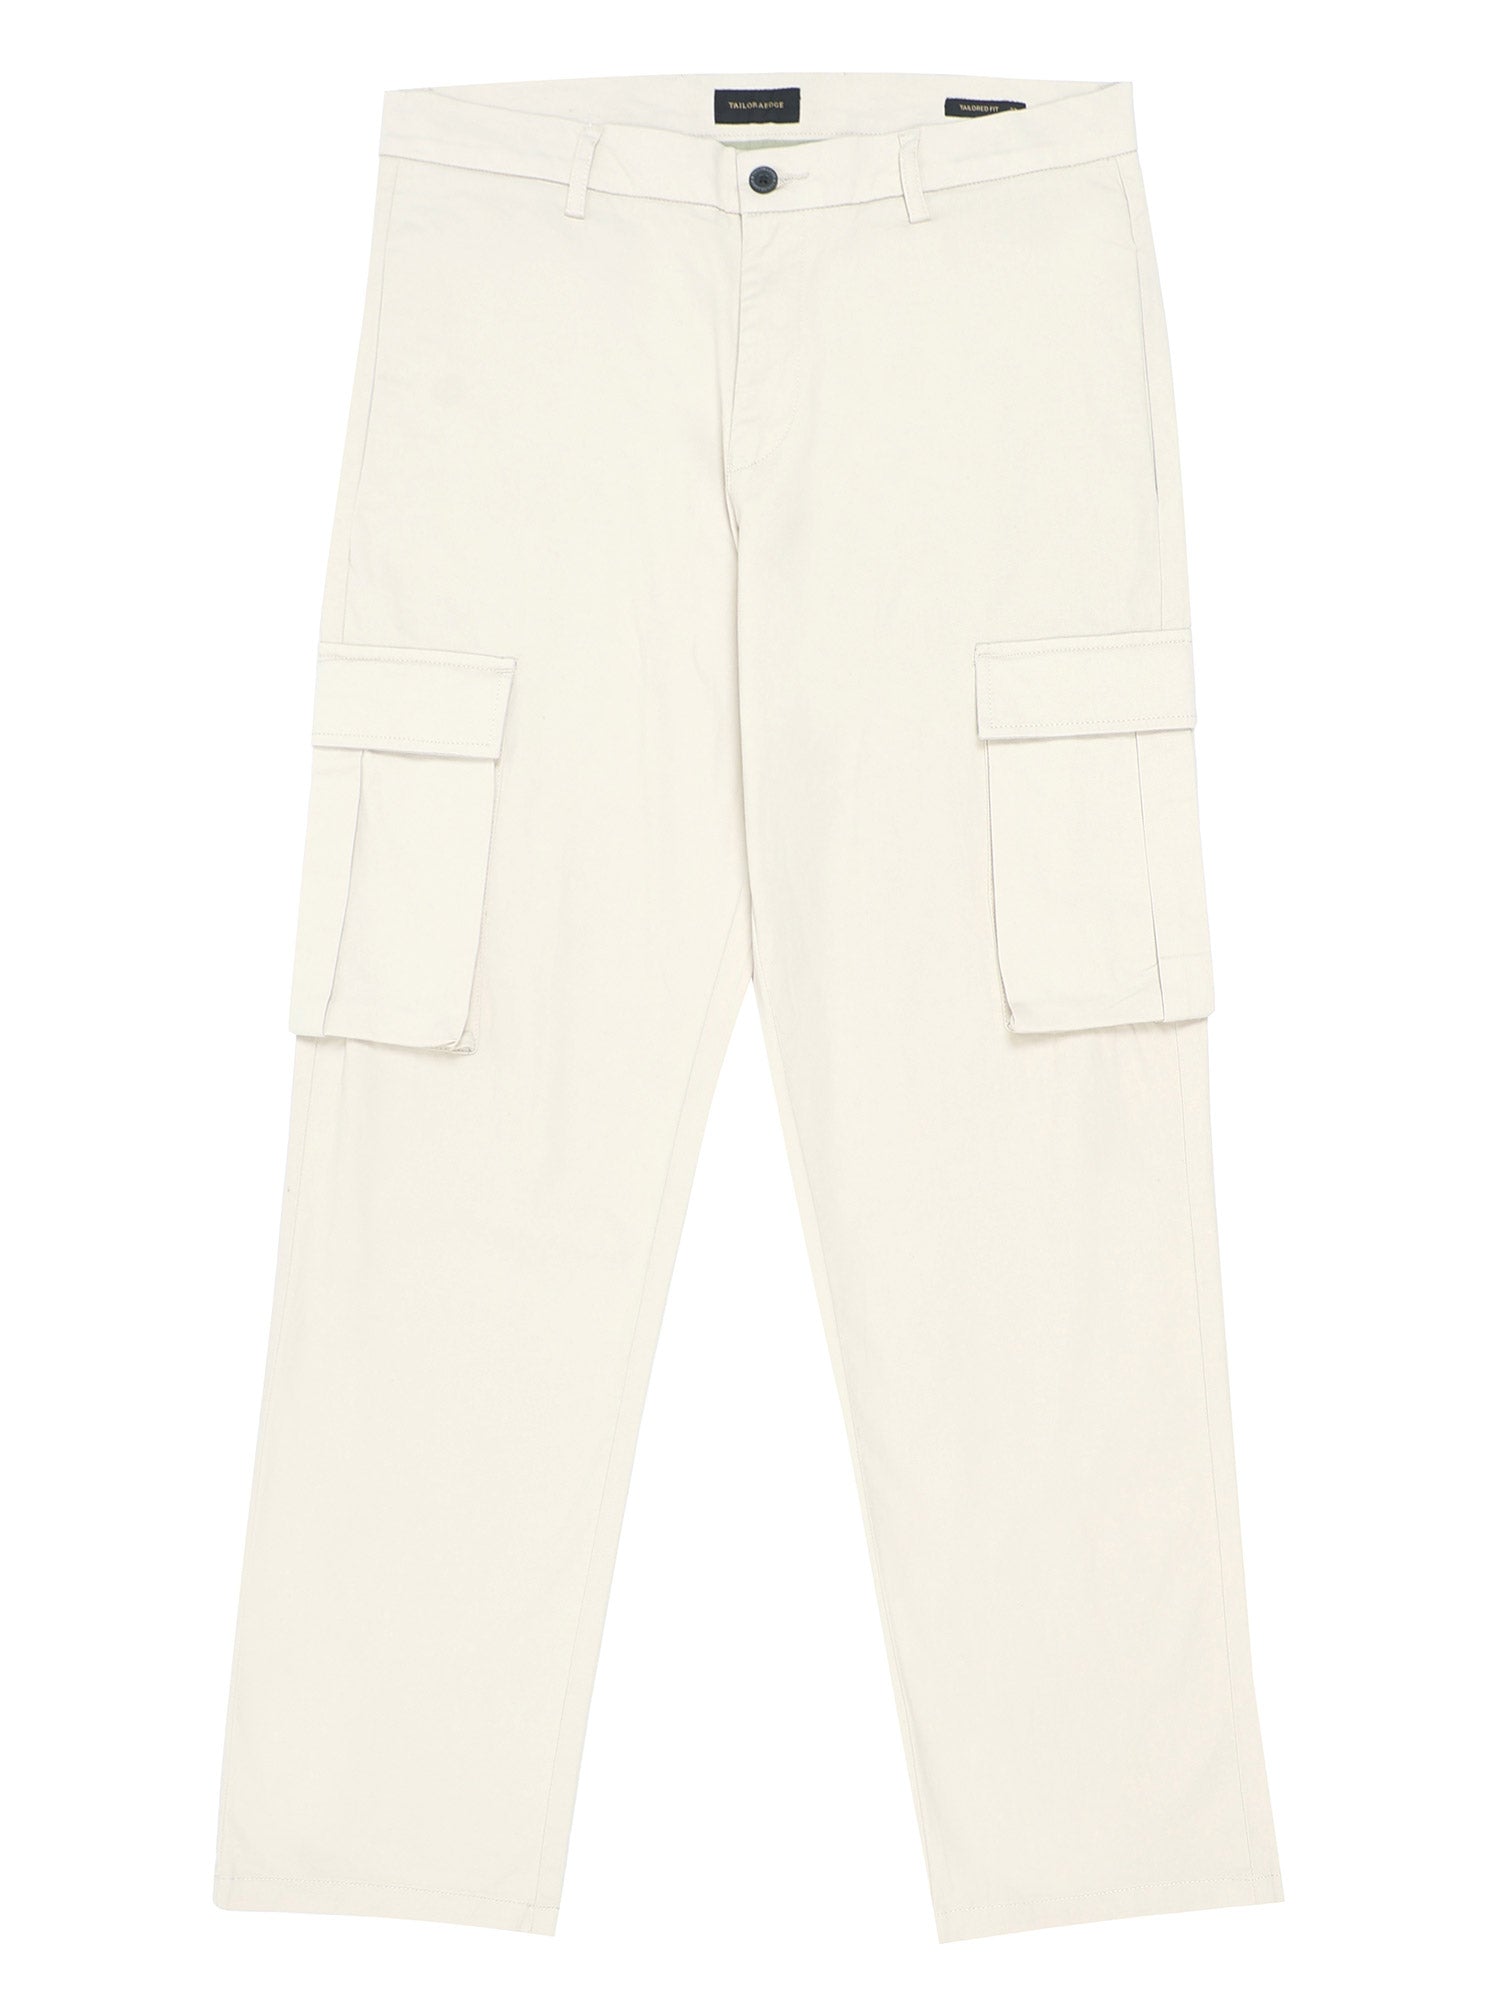 Buy Latest Finest Twill Cream Mens Baggy Cargo Pants Online